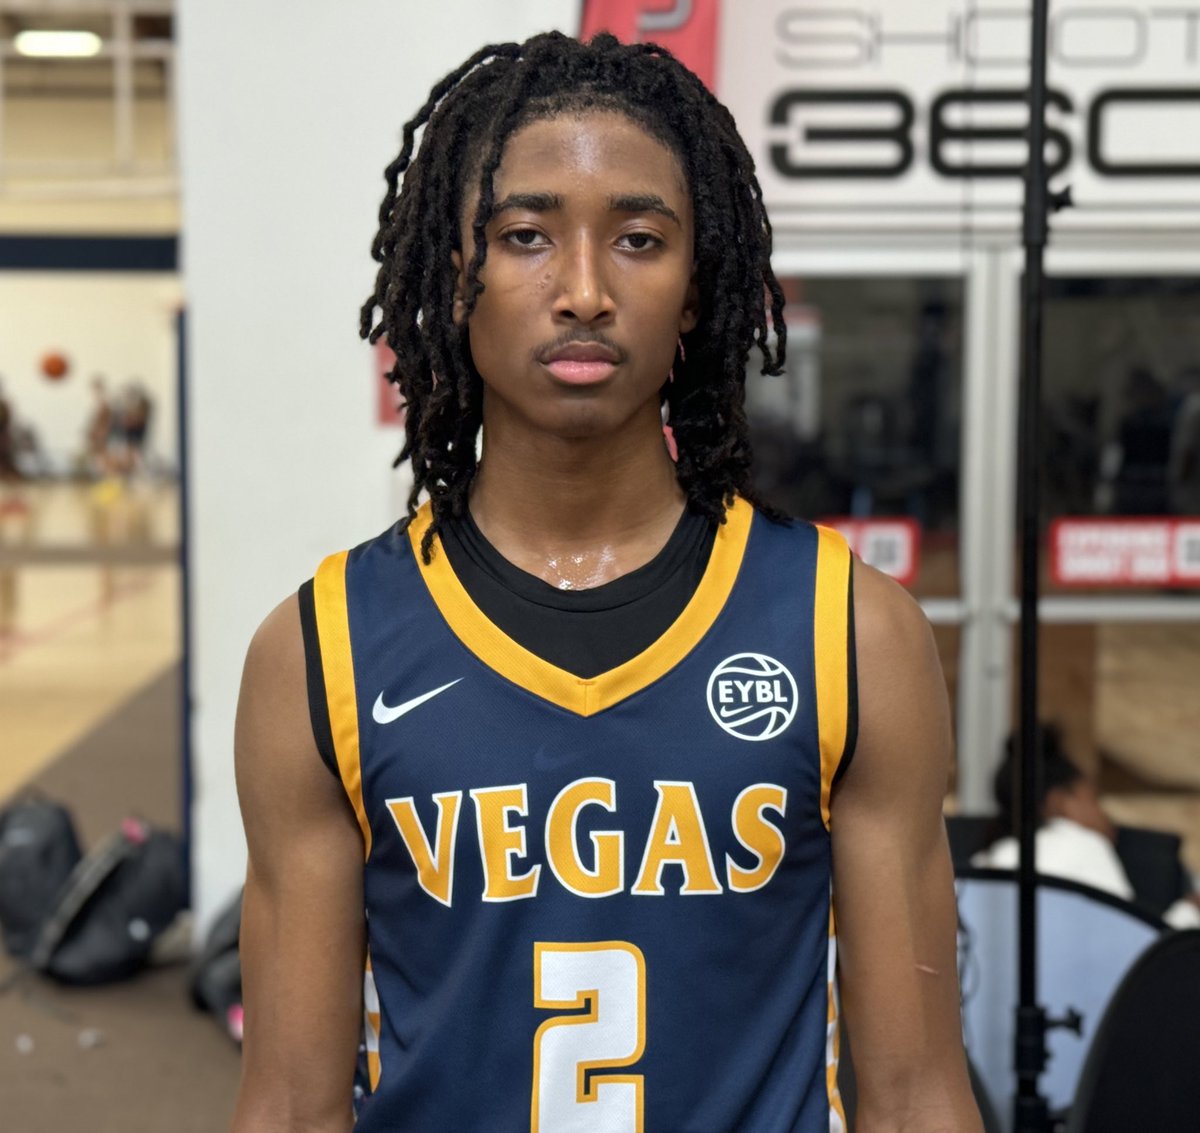 Vegas Elite’s personnel left a big impression in two wins over SD-based programs, none more so than 6-6 Bella Vista Prep W Jaden Vance. Excellent positional size, length and athleticism and is an efficient scorer and knockdown shooter off the catch.